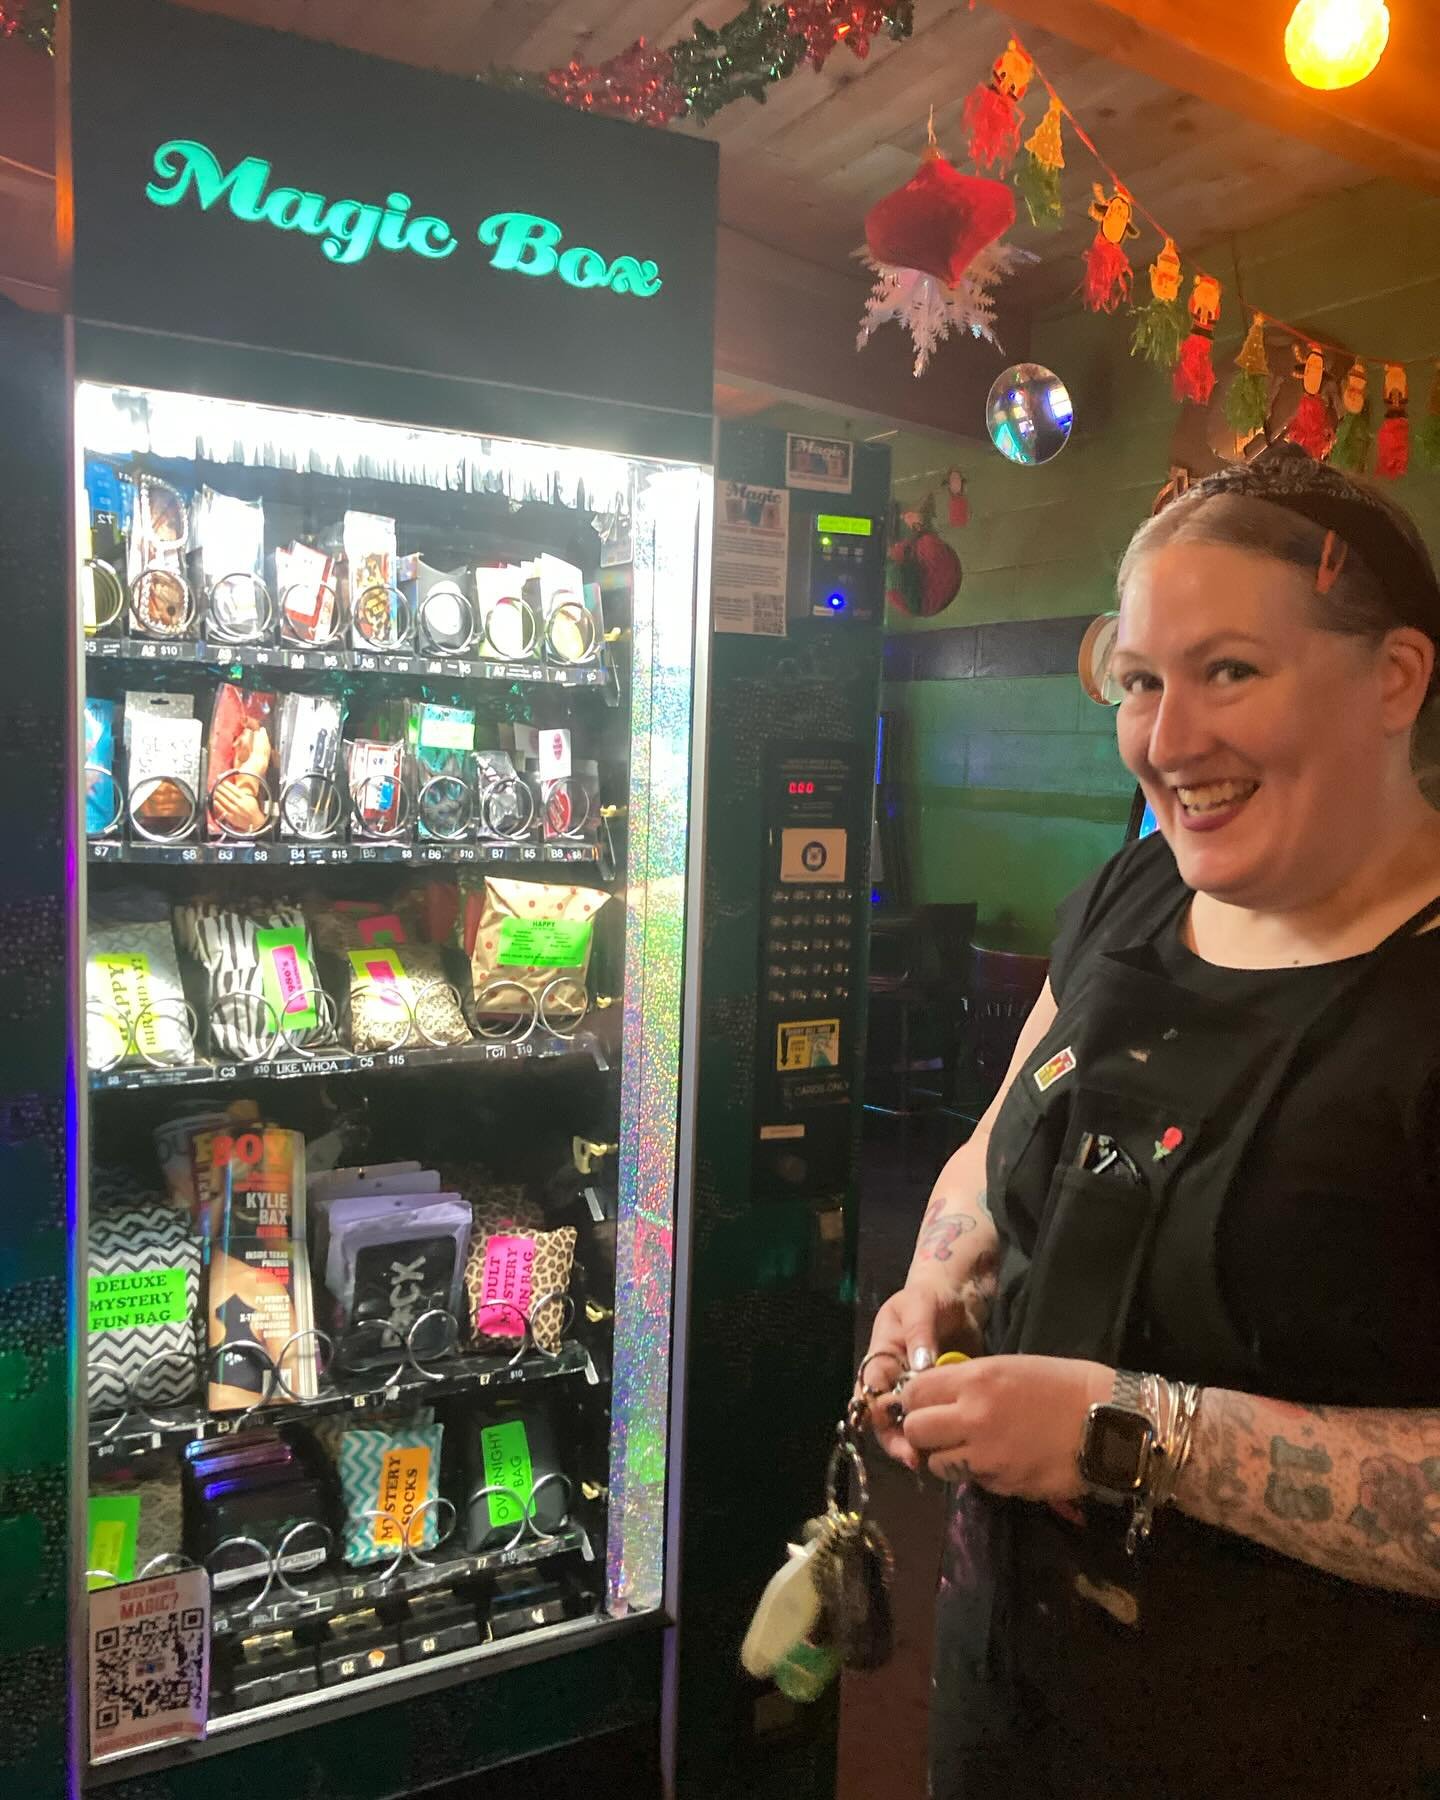 It&rsquo;s a perfect day to enjoy one of the many Magic Box locations with a patio. Maybe go to @thestandardpdx and get a slushee? 

#magicbox #magicboxvending #travelportland #traveloregon #happeninginpdx #pdxnow #magicbox #magicboxvending #vendingm